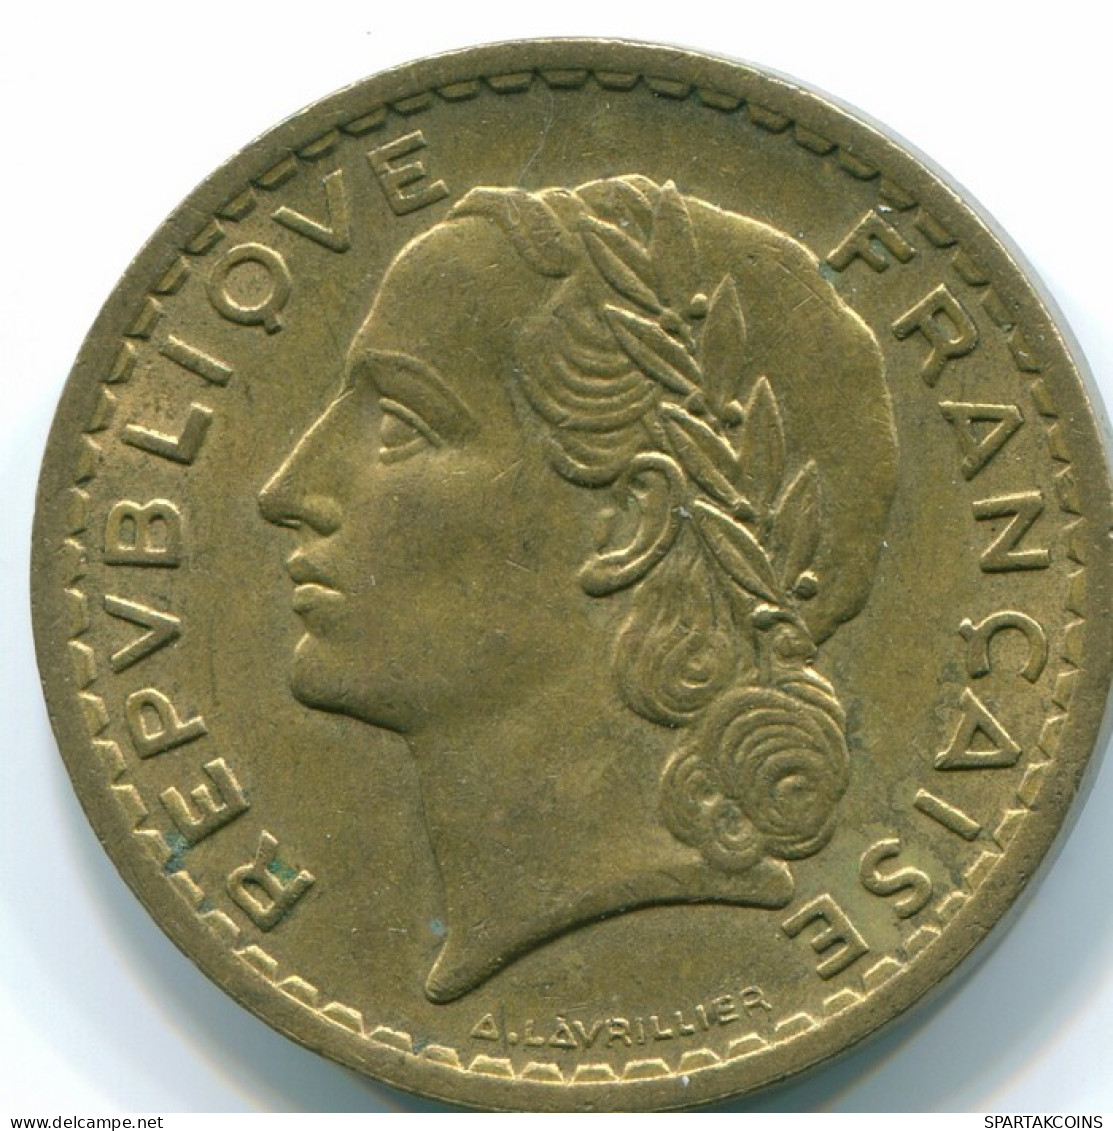 5 FRANCS 1945 FRANCIA FRANCE COLONIAL FOR USE IN AFRICA XF #FR1020.32.E - 5 Francs